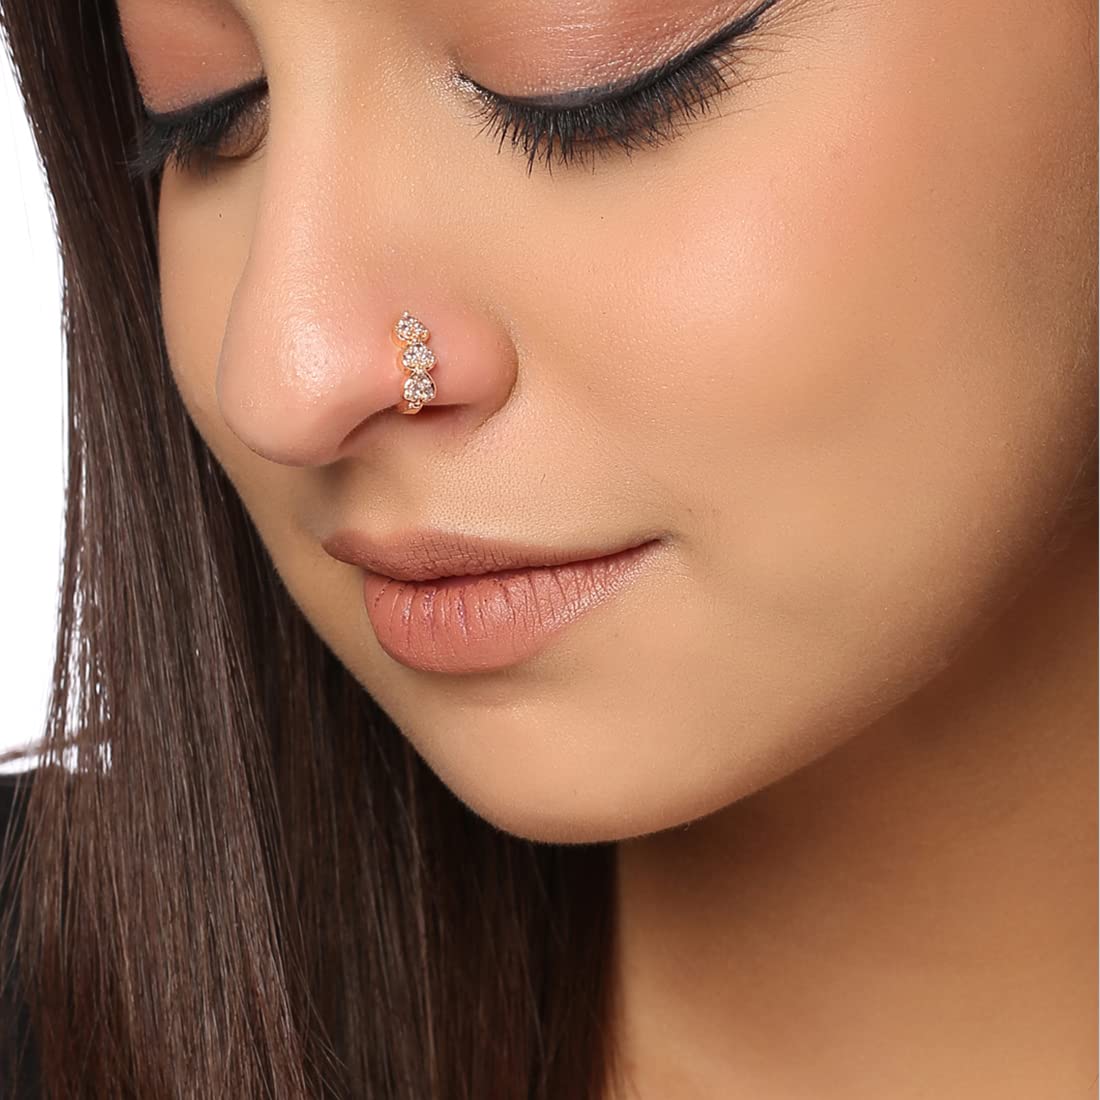 Small Oas nose ring (left + right side) – Flying Fish Accessories